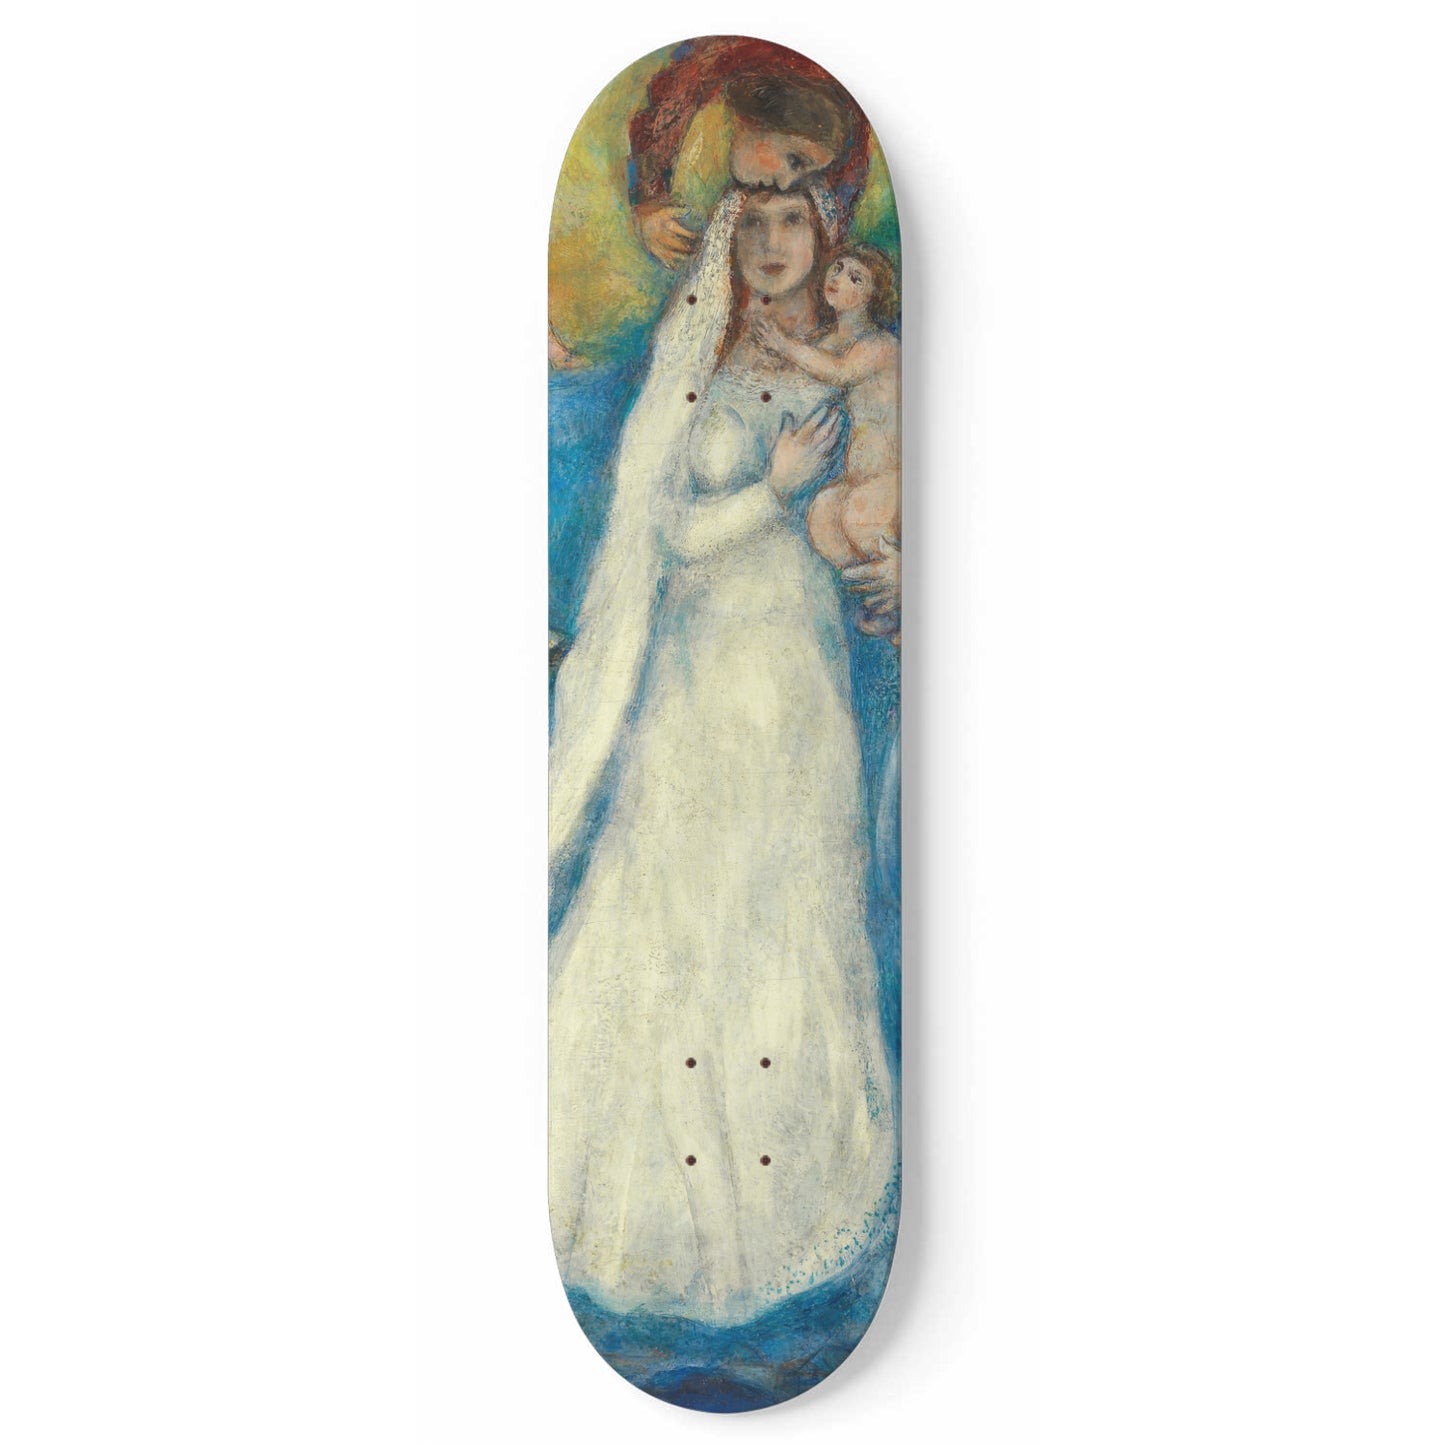 Marc Chagall -The Madonna of the Village - Skateboard Wall Art